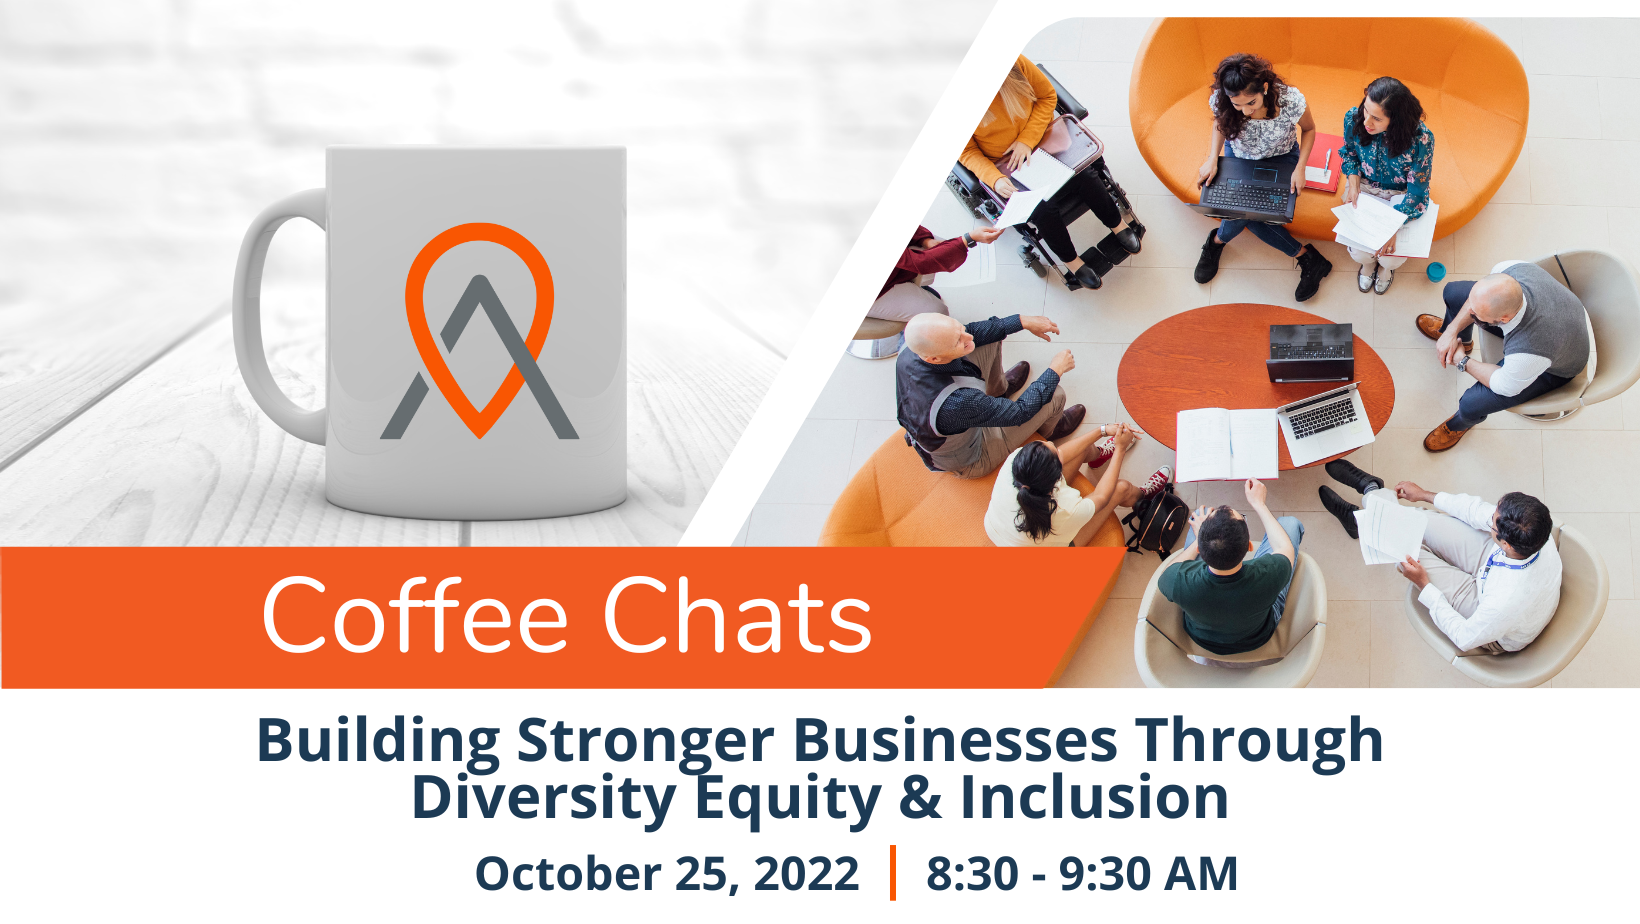 Event Promo Photo For Coffee Chats: Building Stronger Businesses through Diversity, Equity, and Inclusion